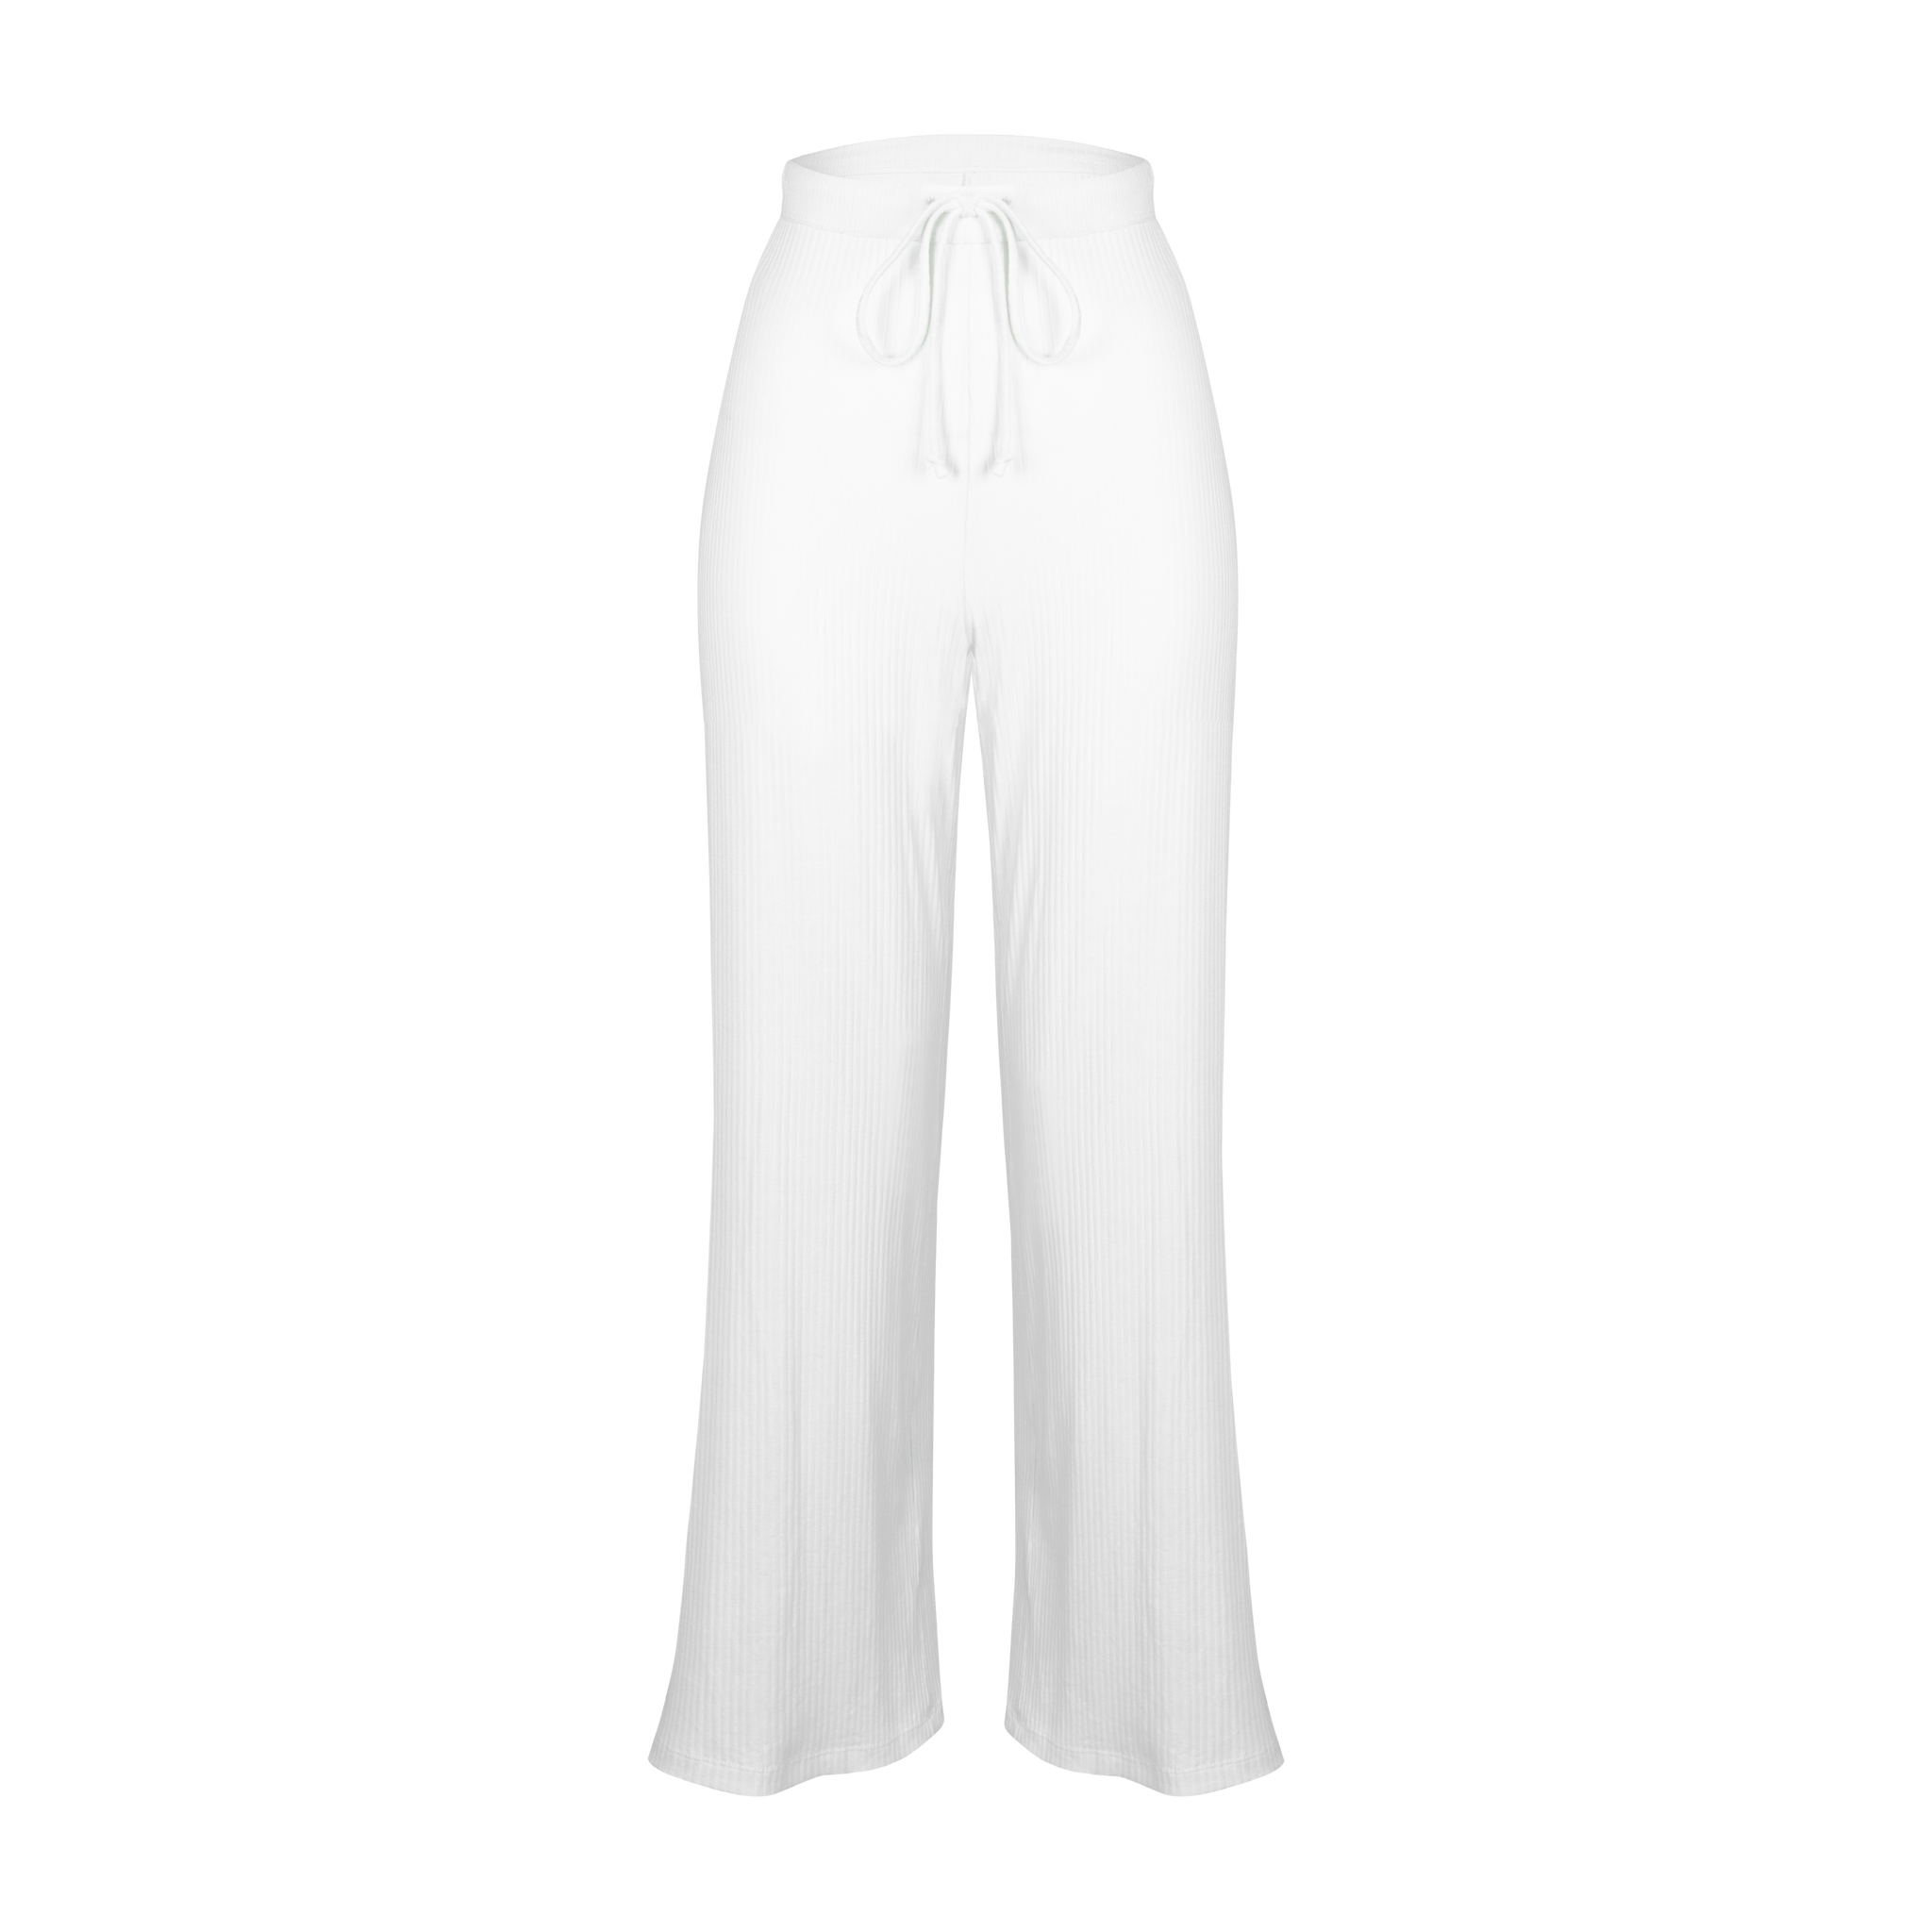 Luna Pants White - APPAREL THIS IS A LOVE SONG